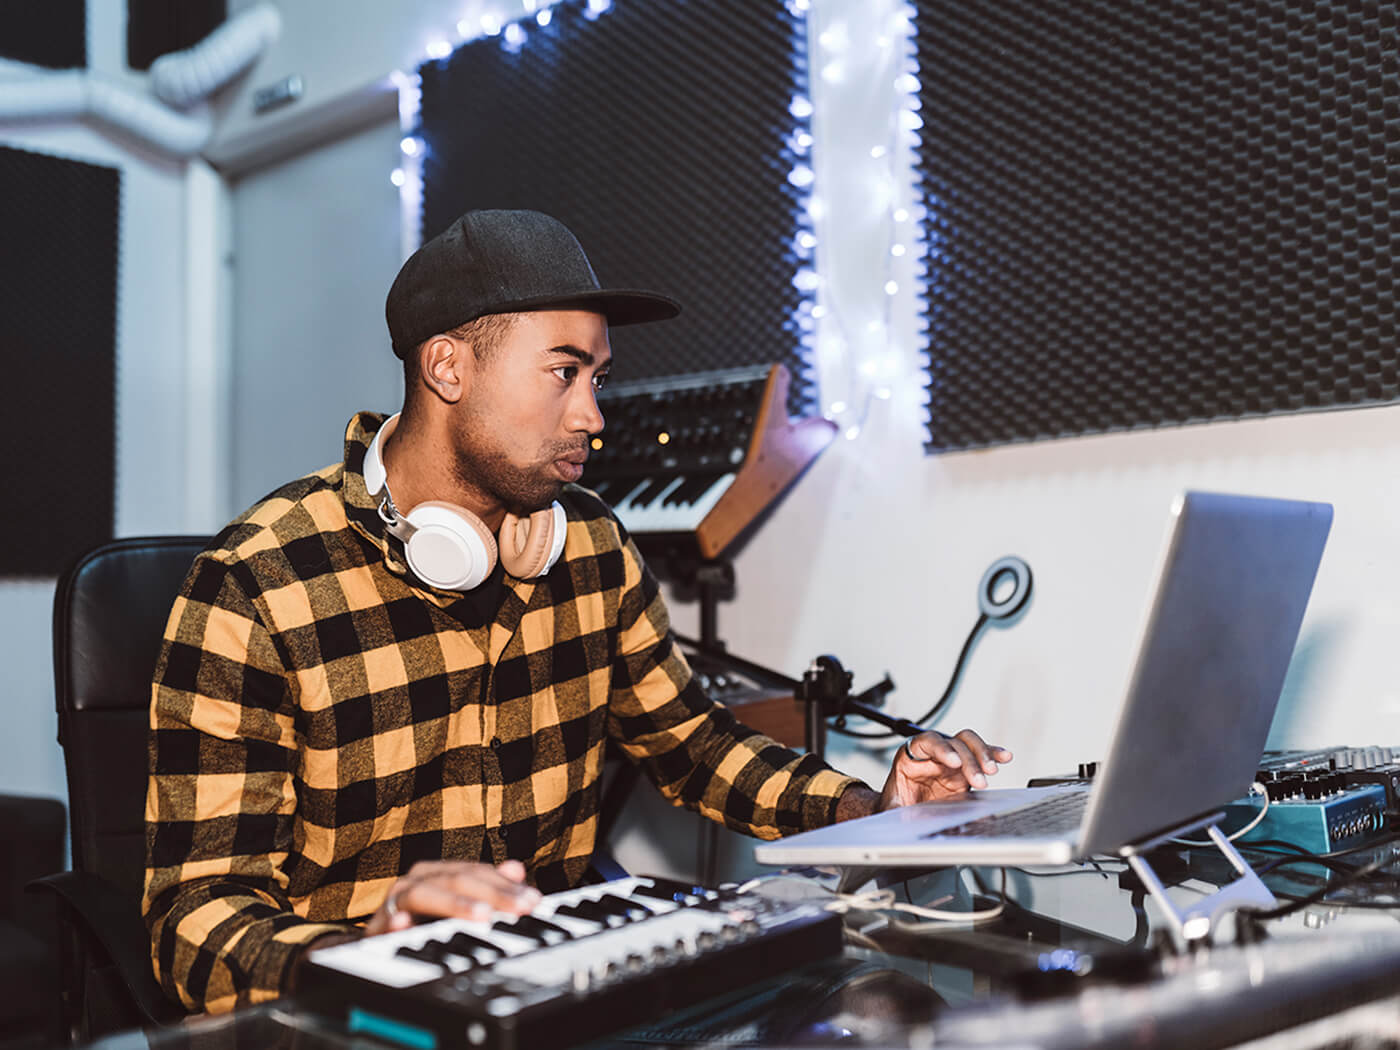 Music producer working in a studio, photo by Jose Carlos Cerdeno Martinez via Getty Images